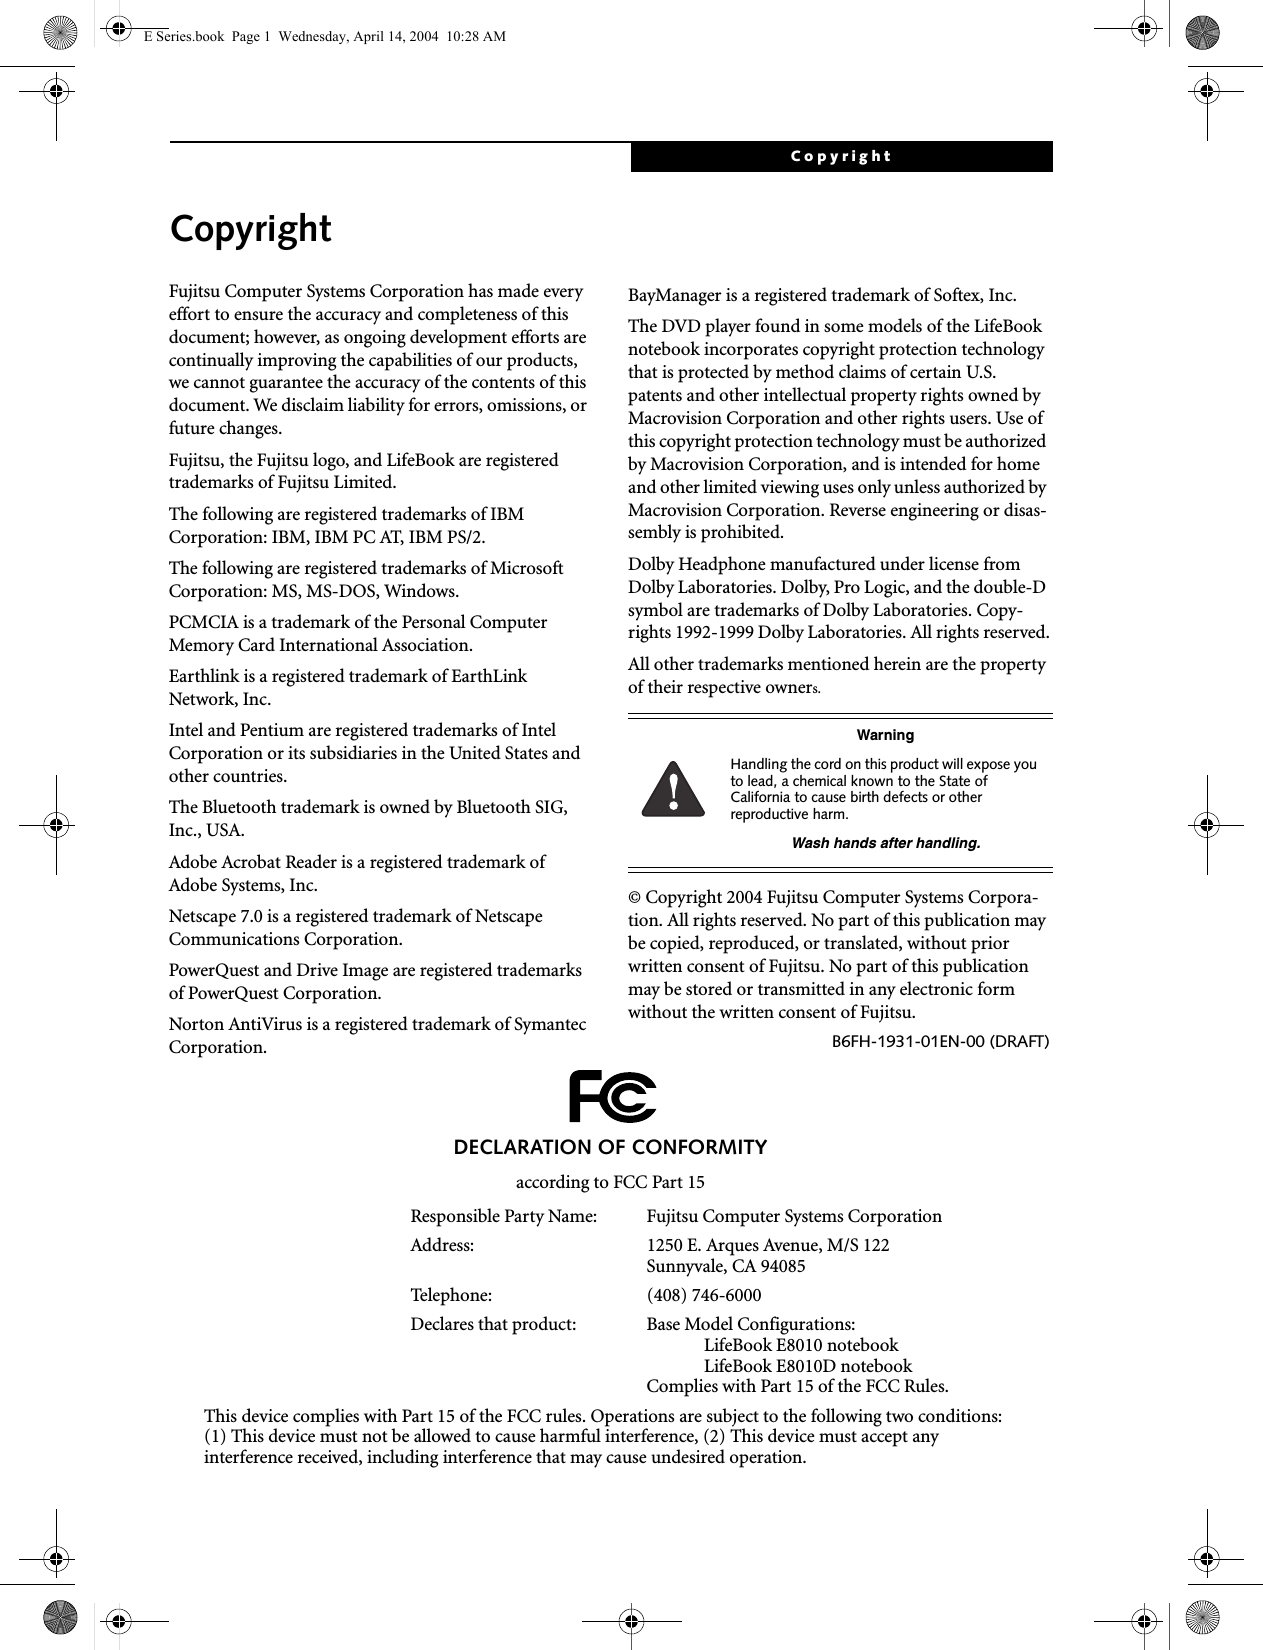 CopyrightCopyrightFujitsu Computer Systems Corporation has made every effort to ensure the accuracy and completeness of this document; however, as ongoing development efforts are continually improving the capabilities of our products, we cannot guarantee the accuracy of the contents of this document. We disclaim liability for errors, omissions, or future changes.Fujitsu, the Fujitsu logo, and LifeBook are registered trademarks of Fujitsu Limited.The following are registered trademarks of IBM Corporation: IBM, IBM PC AT, IBM PS/2. The following are registered trademarks of Microsoft Corporation: MS, MS-DOS, Windows.PCMCIA is a trademark of the Personal Computer Memory Card International Association.Earthlink is a registered trademark of EarthLink Network, Inc. Intel and Pentium are registered trademarks of Intel Corporation or its subsidiaries in the United States and other countries.The Bluetooth trademark is owned by Bluetooth SIG, Inc., USA.Adobe Acrobat Reader is a registered trademark of Adobe Systems, Inc.Netscape 7.0 is a registered trademark of Netscape Communications Corporation.PowerQuest and Drive Image are registered trademarks of PowerQuest Corporation.Norton AntiVirus is a registered trademark of Symantec Corporation.BayManager is a registered trademark of Softex, Inc.The DVD player found in some models of the LifeBook notebook incorporates copyright protection technology that is protected by method claims of certain U.S. patents and other intellectual property rights owned by Macrovision Corporation and other rights users. Use of this copyright protection technology must be authorized by Macrovision Corporation, and is intended for home and other limited viewing uses only unless authorized by Macrovision Corporation. Reverse engineering or disas-sembly is prohibited.Dolby Headphone manufactured under license from Dolby Laboratories. Dolby, Pro Logic, and the double-D symbol are trademarks of Dolby Laboratories. Copy-rights 1992-1999 Dolby Laboratories. All rights reserved.All other trademarks mentioned herein are the property of their respective owners.© Copyright 2004 Fujitsu Computer Systems Corpora-tion. All rights reserved. No part of this publication may be copied, reproduced, or translated, without prior written consent of Fujitsu. No part of this publication may be stored or transmitted in any electronic form without the written consent of Fujitsu.B6FH-1931-01EN-00 (DRAFT)WarningHandling the cord on this product will expose you to lead, a chemical known to the State of California to cause birth defects or other reproductive harm. Wash hands after handling.DECLARATION OF CONFORMITYaccording to FCC Part 15Responsible Party Name: Fujitsu Computer Systems CorporationAddress:  1250 E. Arques Avenue, M/S 122Sunnyvale, CA 94085Telephone: (408) 746-6000Declares that product: Base Model Configurations:LifeBook E8010 notebookLifeBook E8010D notebookComplies with Part 15 of the FCC Rules.This device complies with Part 15 of the FCC rules. Operations are subject to the following two conditions:(1) This device must not be allowed to cause harmful interference, (2) This device must accept anyinterference received, including interference that may cause undesired operation.E Series.book  Page 1  Wednesday, April 14, 2004  10:28 AM